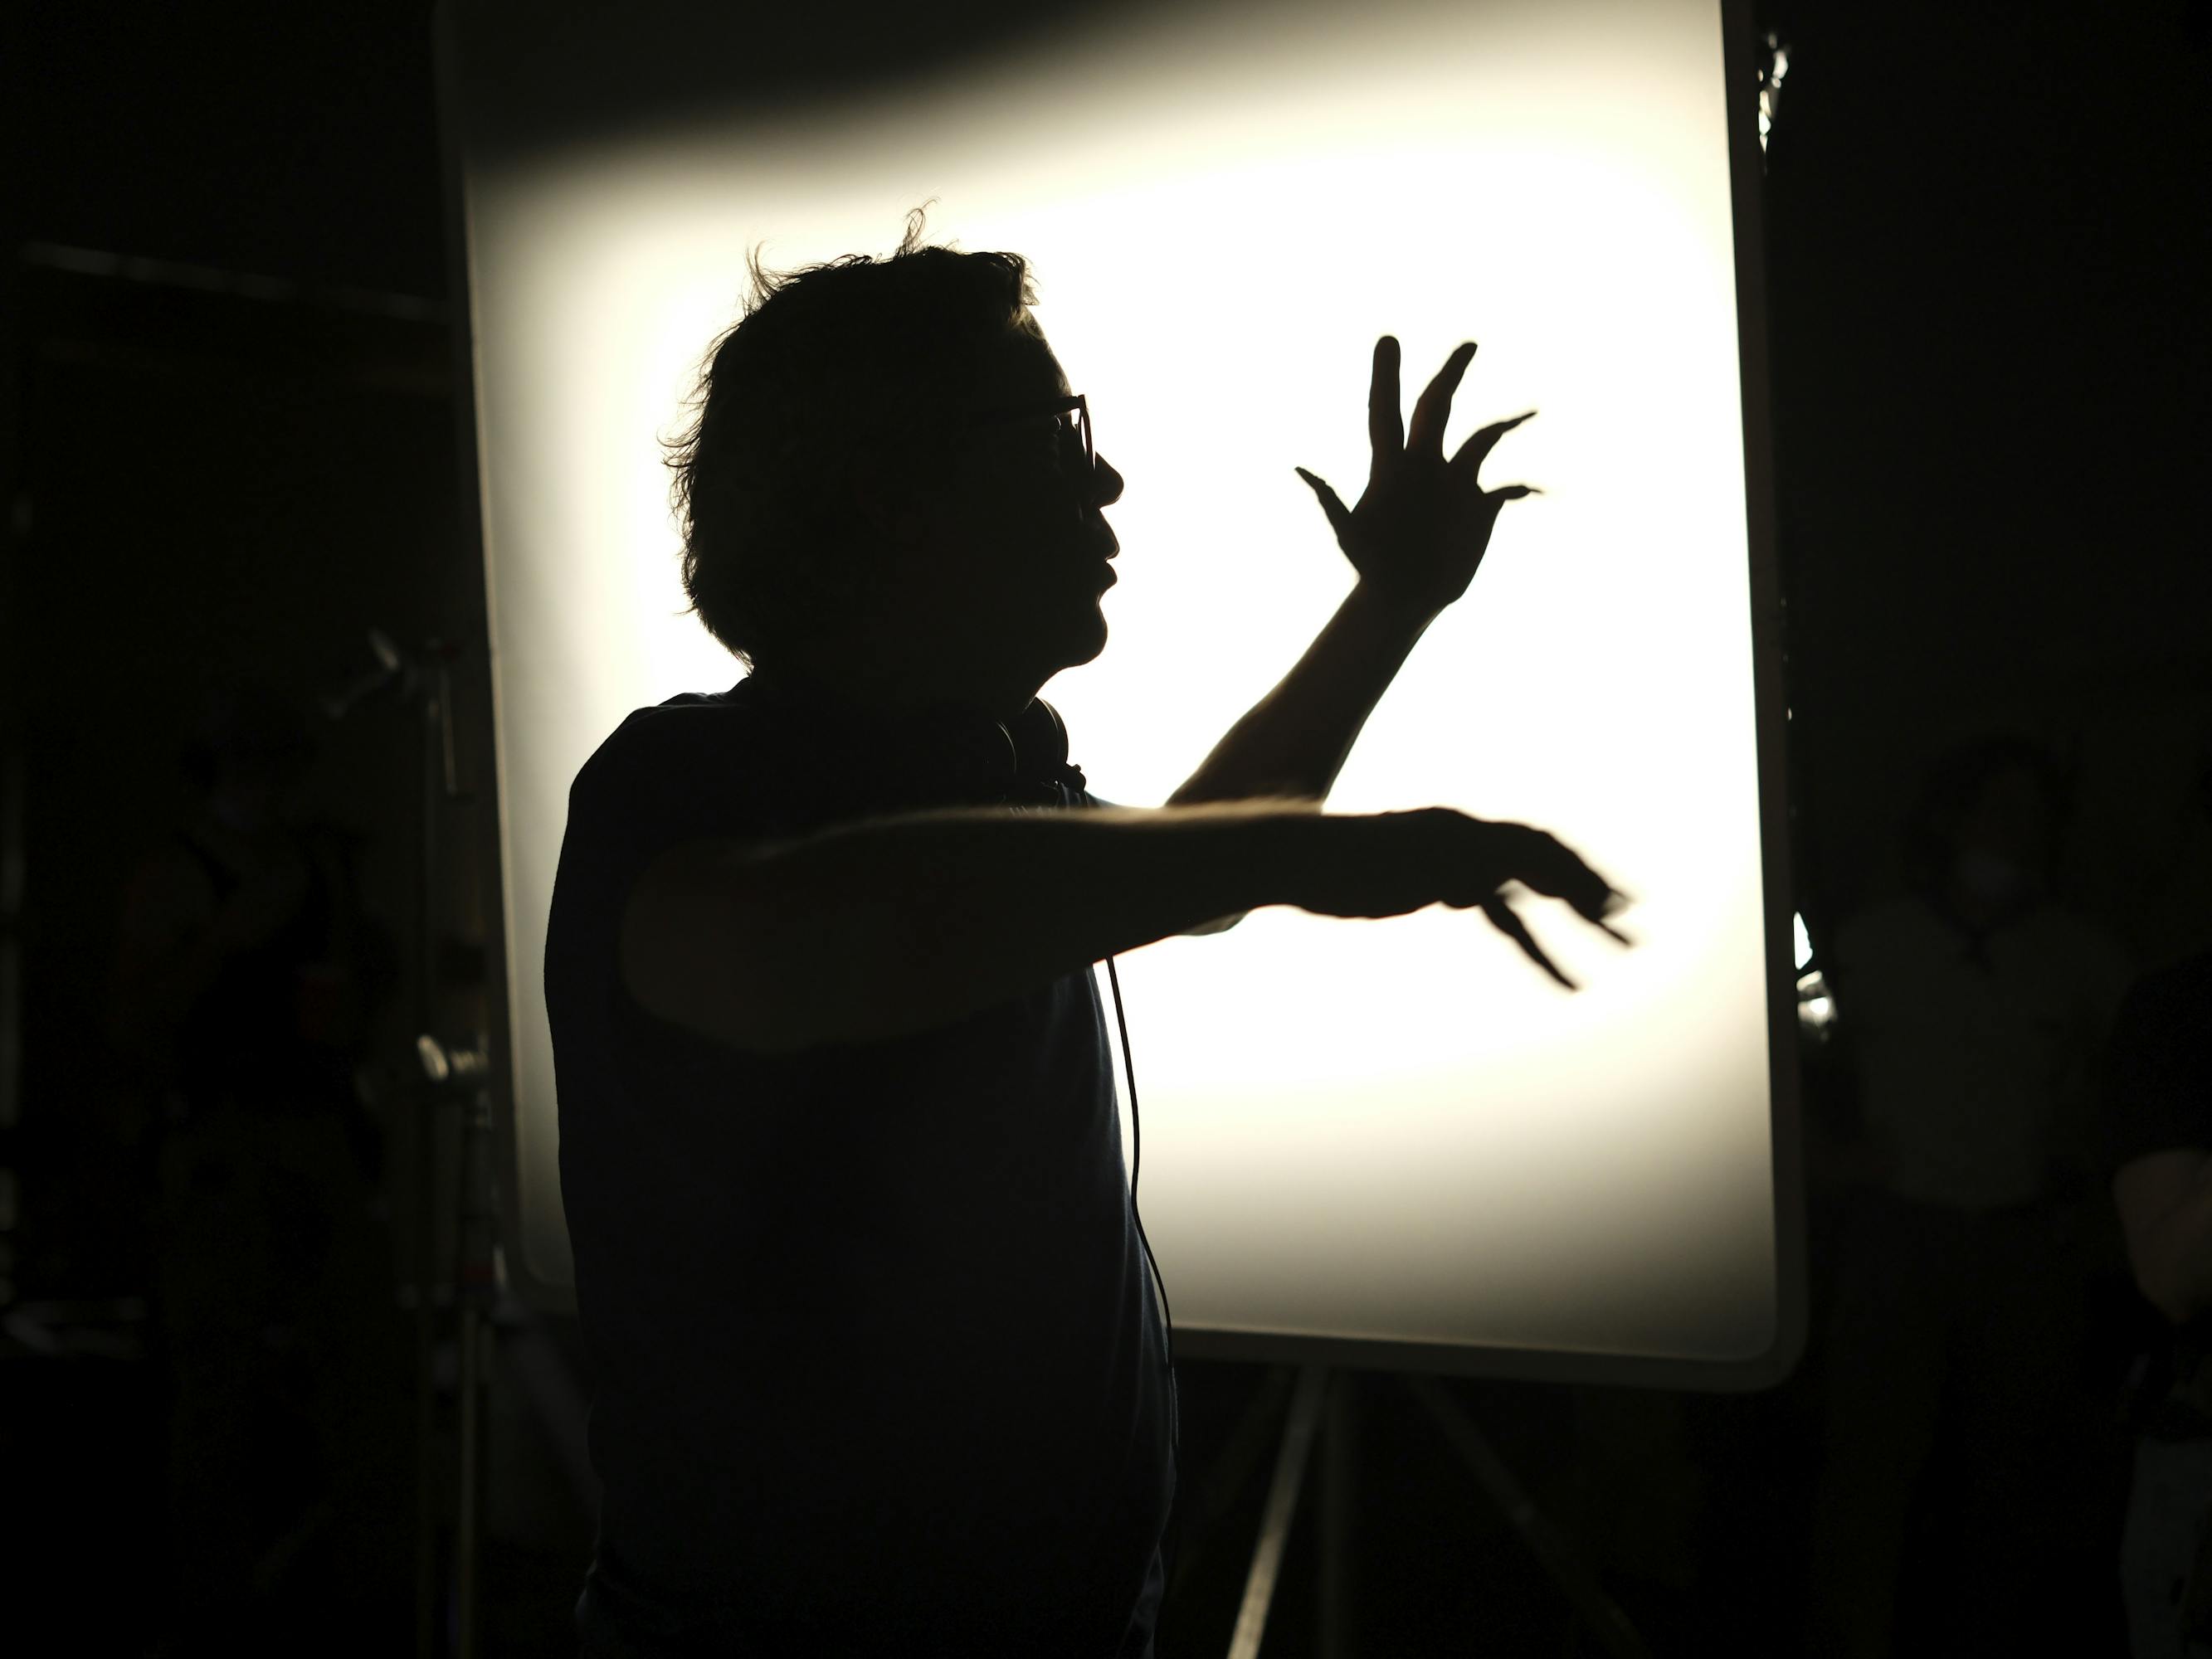 Todd Haynes in silhouette in front of a projector.